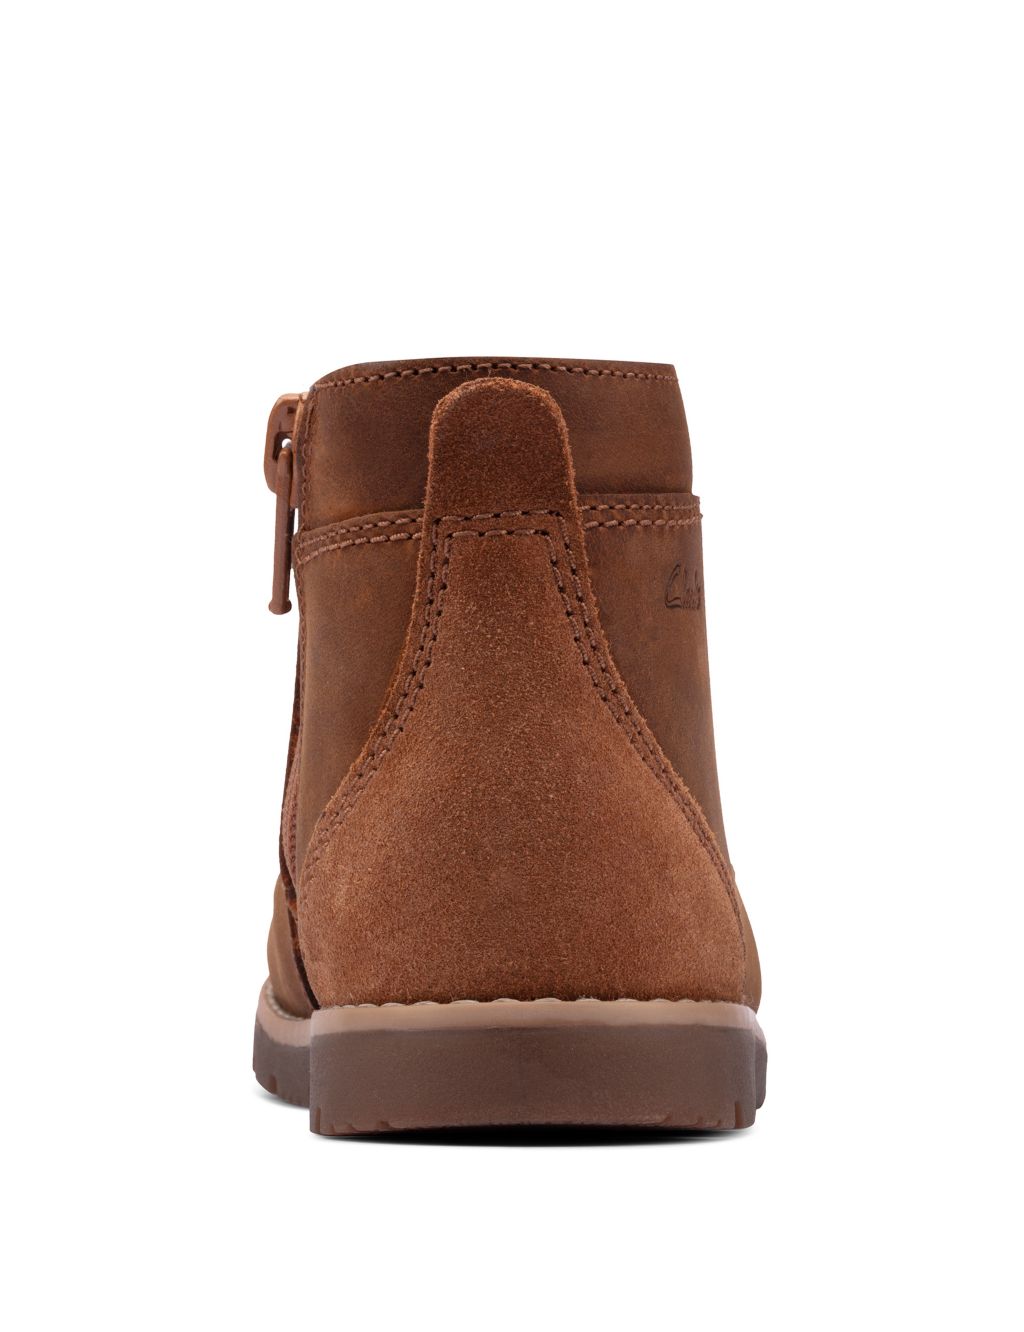 Kids' Leather Ankle Boots image 3